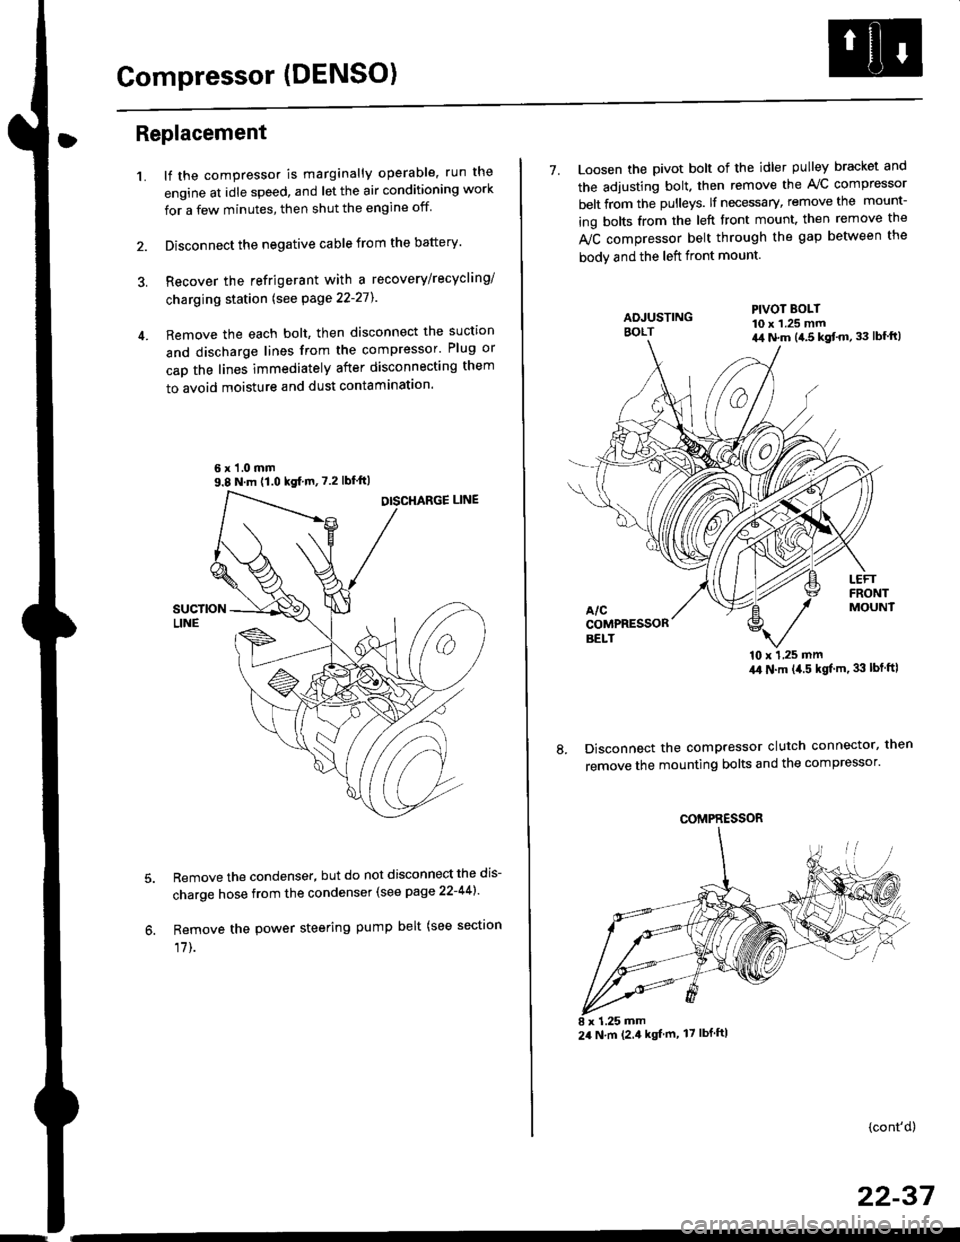 HONDA CIVIC 1996 6.G Service Manual Compressor (DENSO)
Replacement
1.lf the compressor is marginally operable, run the
engine at idle speed, and let the air conditioning work
for a few minutes, then shut the engine off
Disconnect the ne